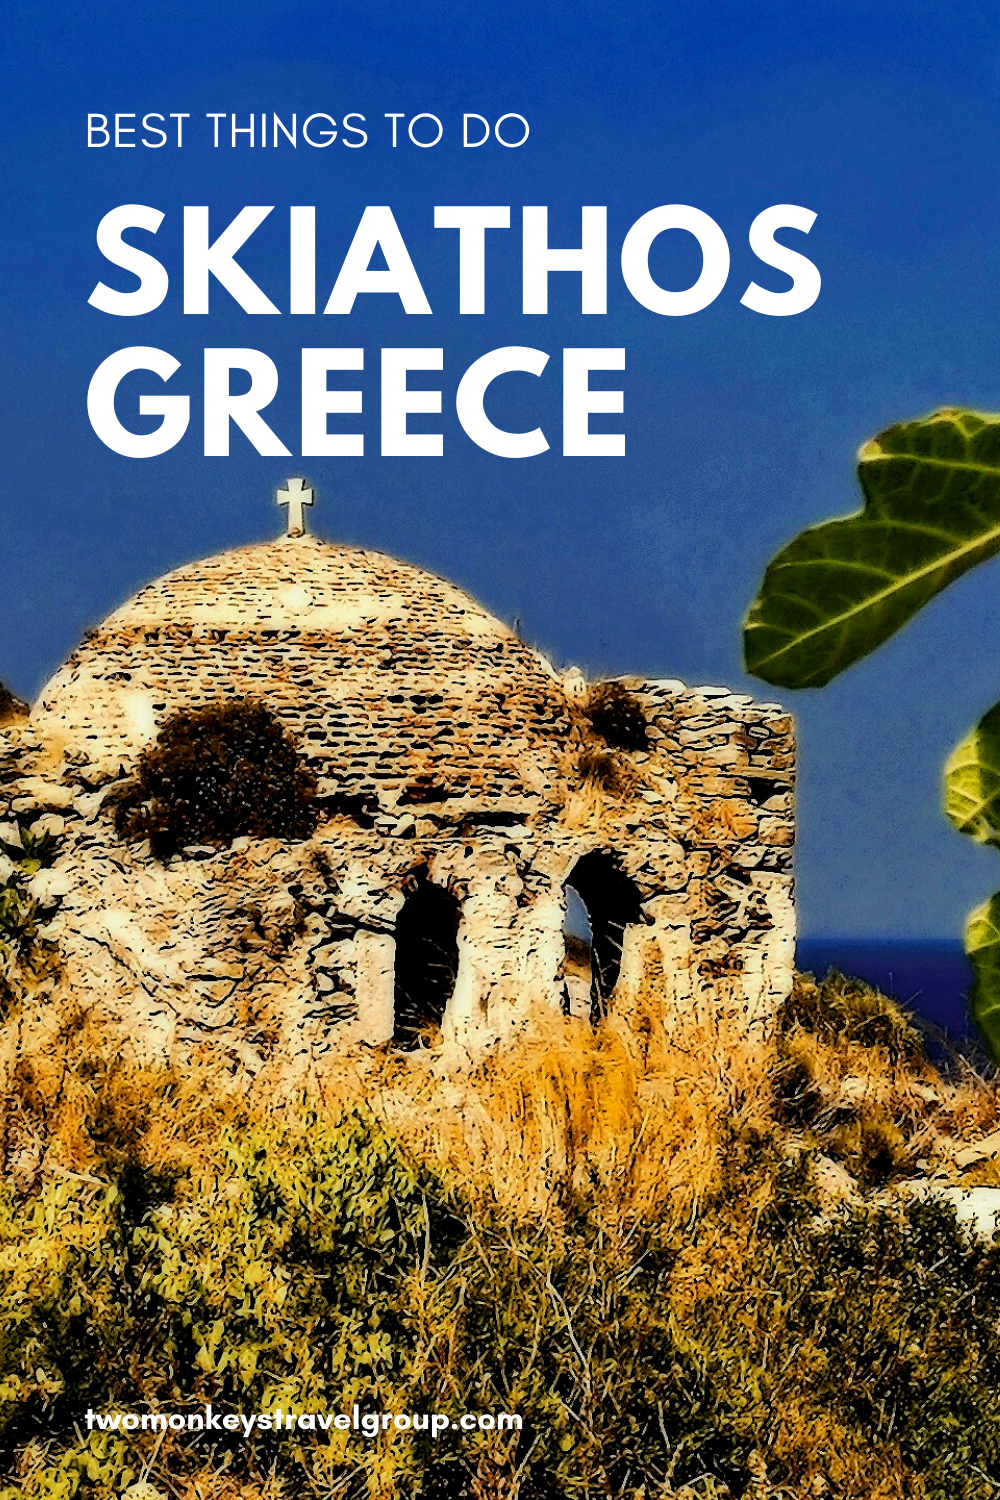 10 Best Things to do in Skiathos, Greece